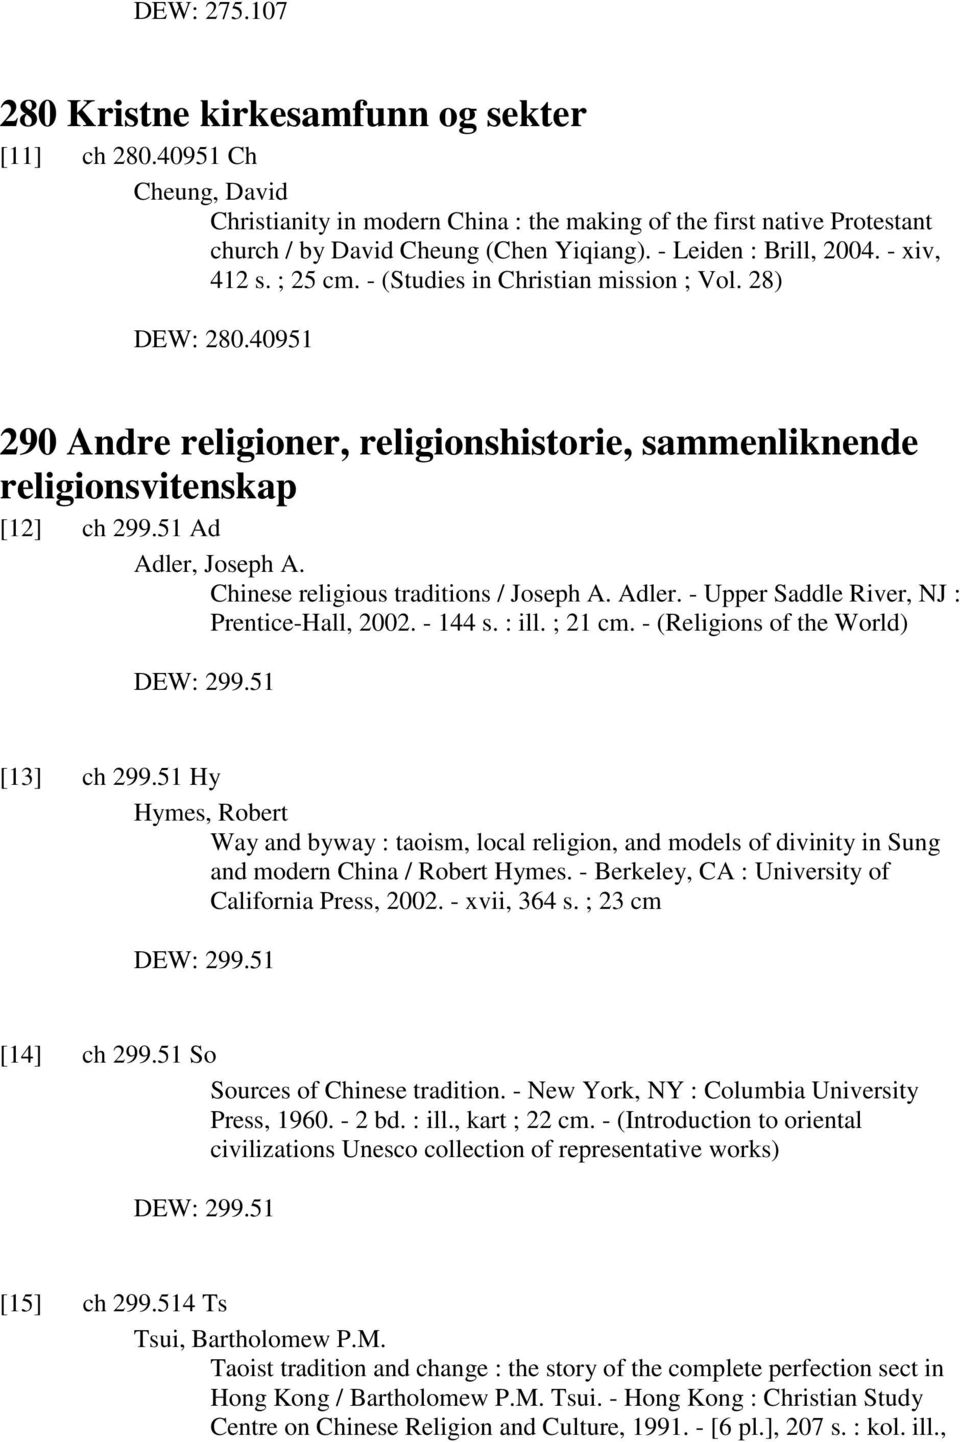 51 Ad Adler, Joseph A. Chinese religious traditions / Joseph A. Adler. - Upper Saddle River, NJ : Prentice-Hall, 2002. - 144 s. : ill. ; 21 cm. - (Religions of the World) DEW: 299.51 [13] ch 299.